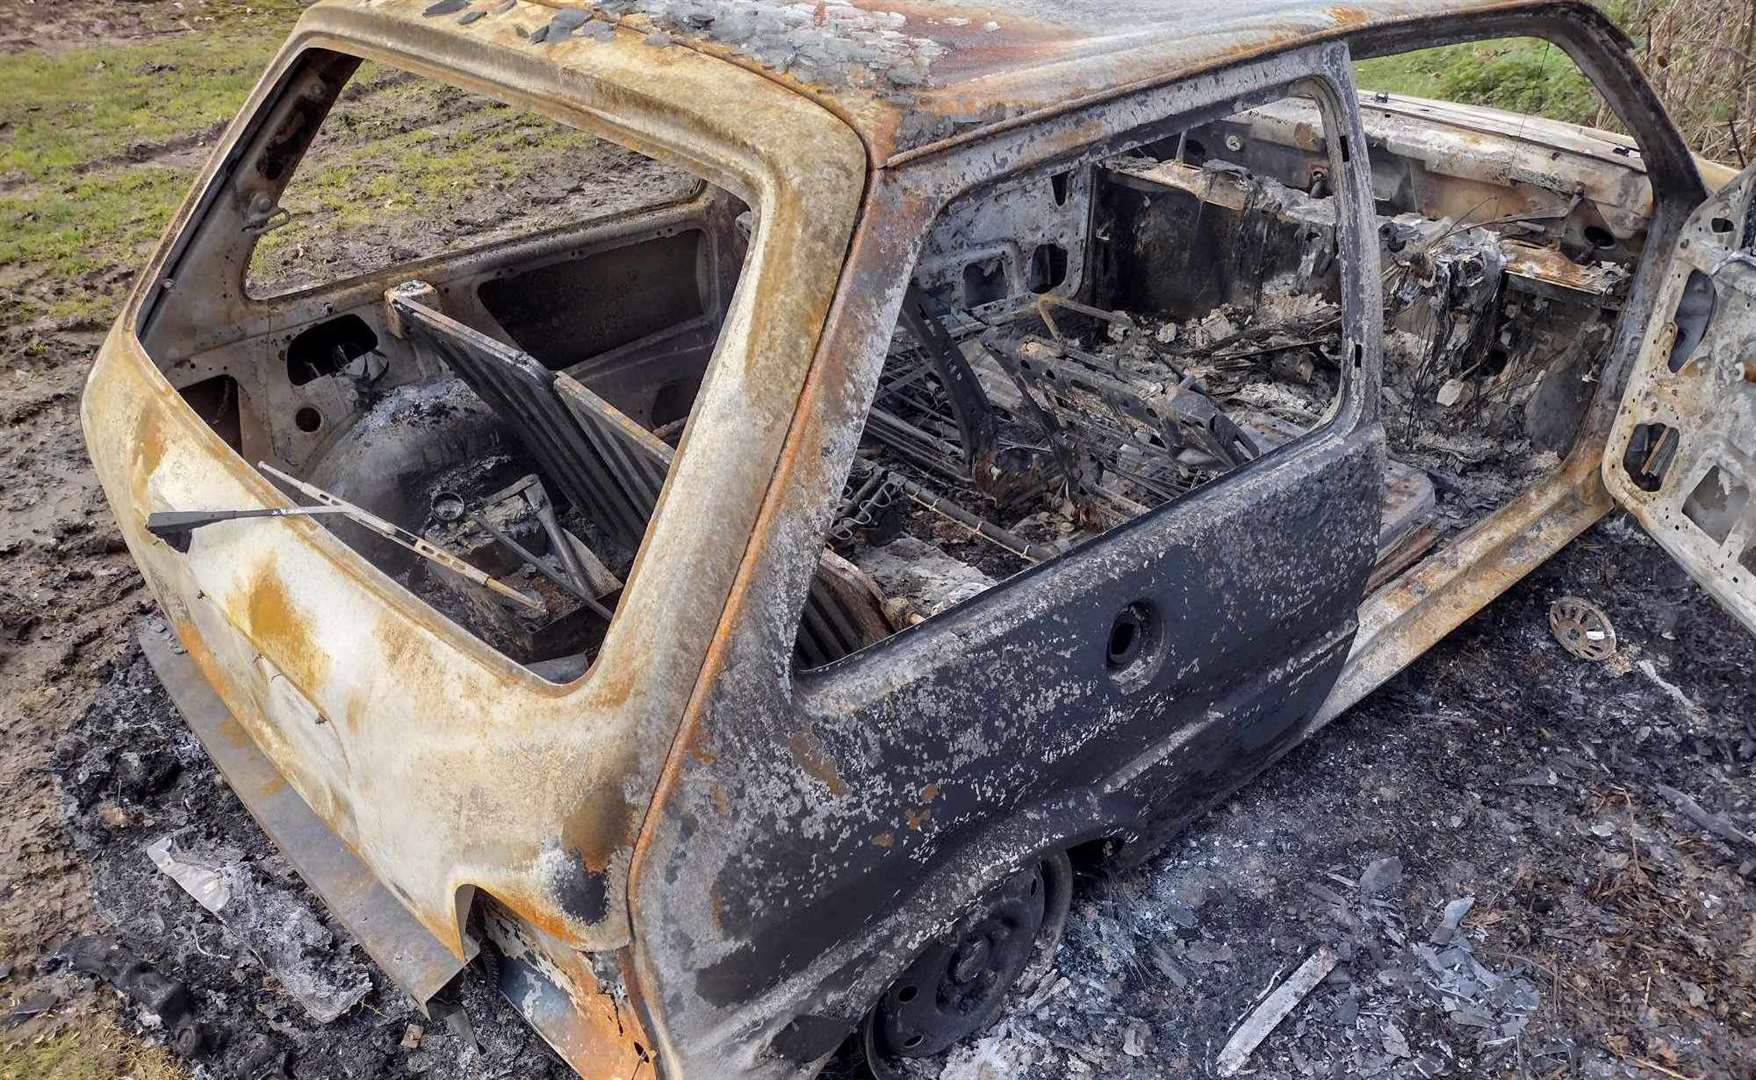 Liam Crook's 1994 Rover Metro was stolen and left burnt out in Milstead. Picture: Liam Crook